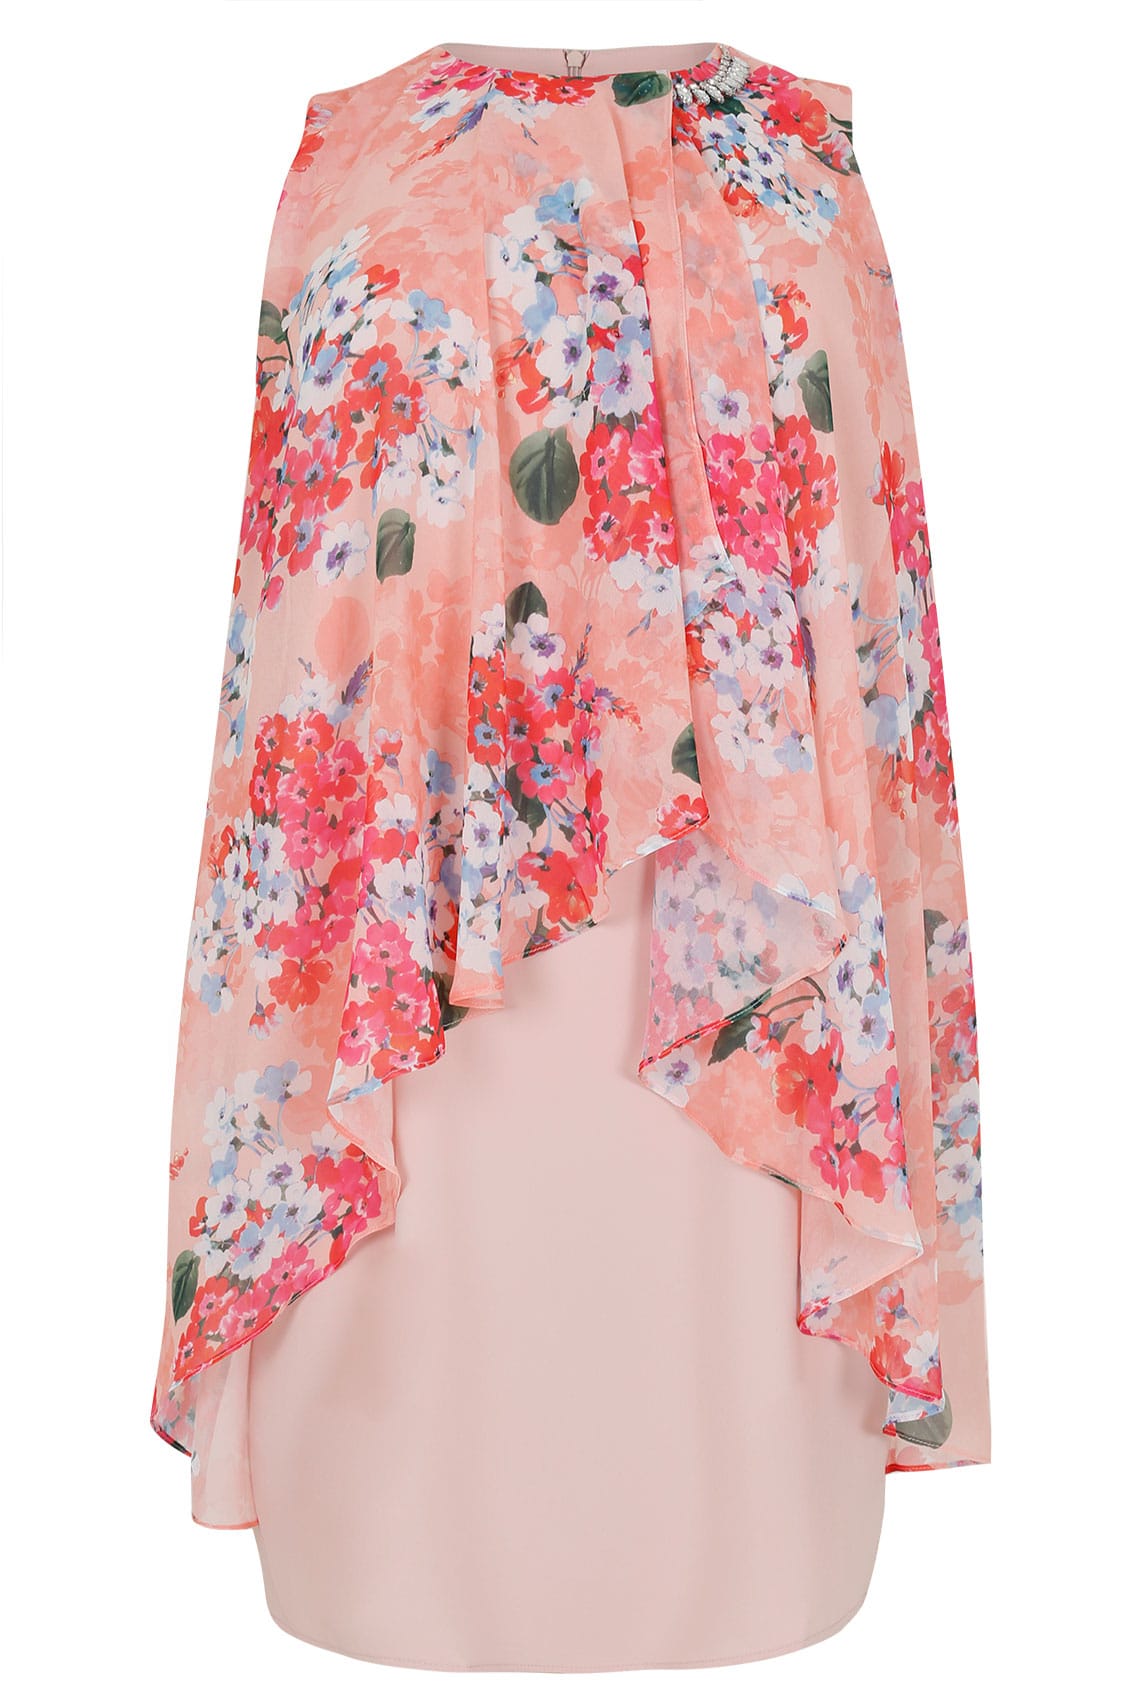 Pink & Coral Floral Printed Dress With Layered Front & Diamante Detail Neckline, Plus size 16 to 36